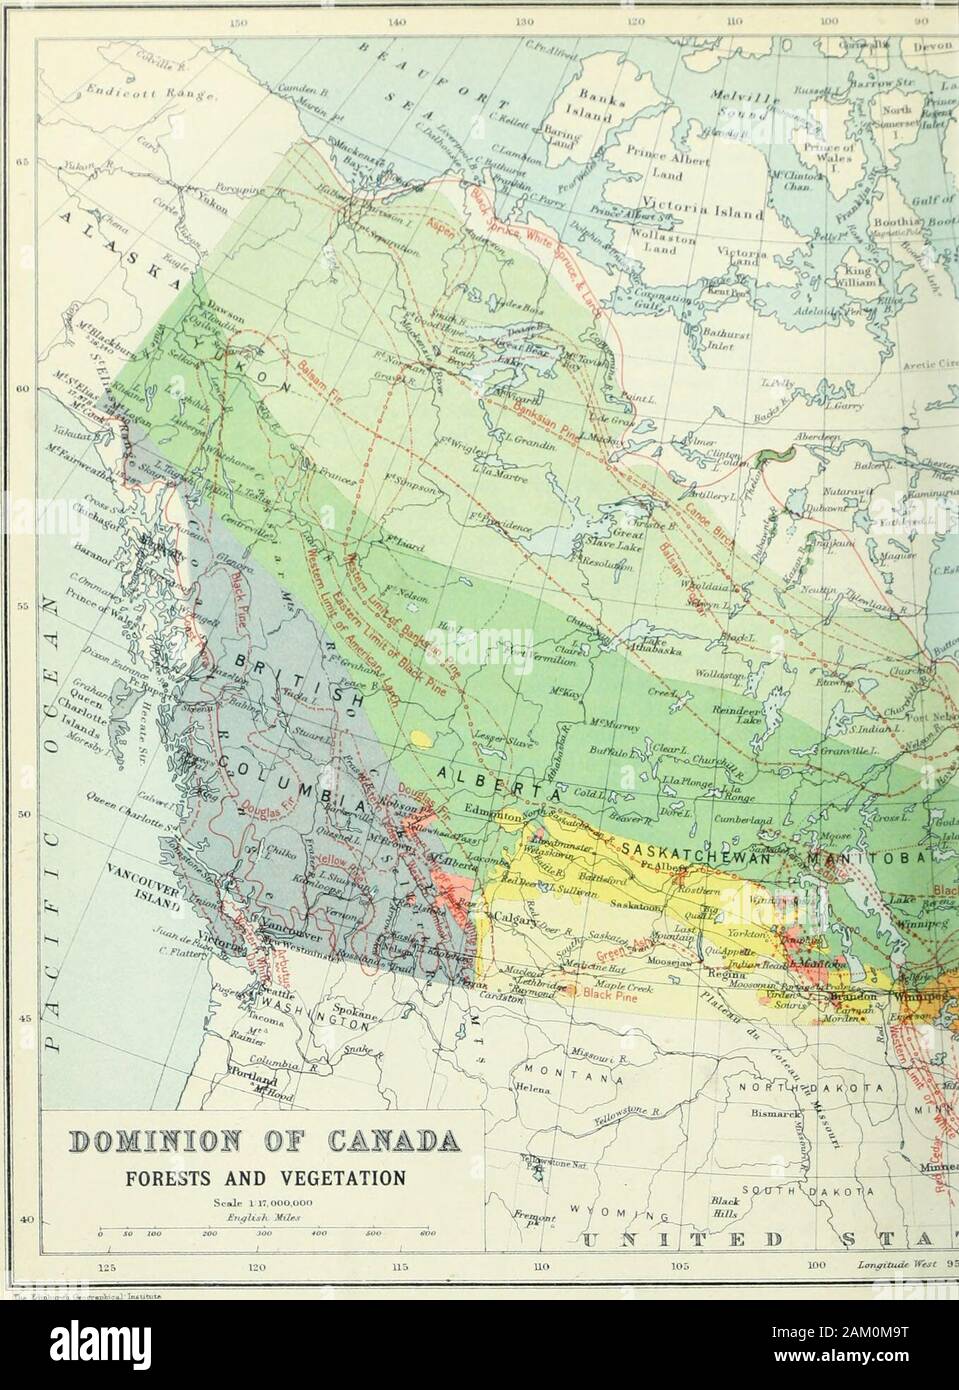 Canada and its provinces : a history of the Canadian people and their institutions by one hundred associates . ning such species as Purshiatridentata, Artemisia tridentata, and species of Gilia, Cactacea,Astu and Erigonum. On the Pacific coast and in the Sclkirks, where the pre-cipitation is heavy, the vegetation is of tropical luxuriance, andthe forest is of great value. The mixed forest of EasternCanada is also most important for its timber. The southernportion of the northern forest has merchantable timber, andthe northern forms a vast storehouse of pulpwood. Wherethe original forest has be Stock Photo